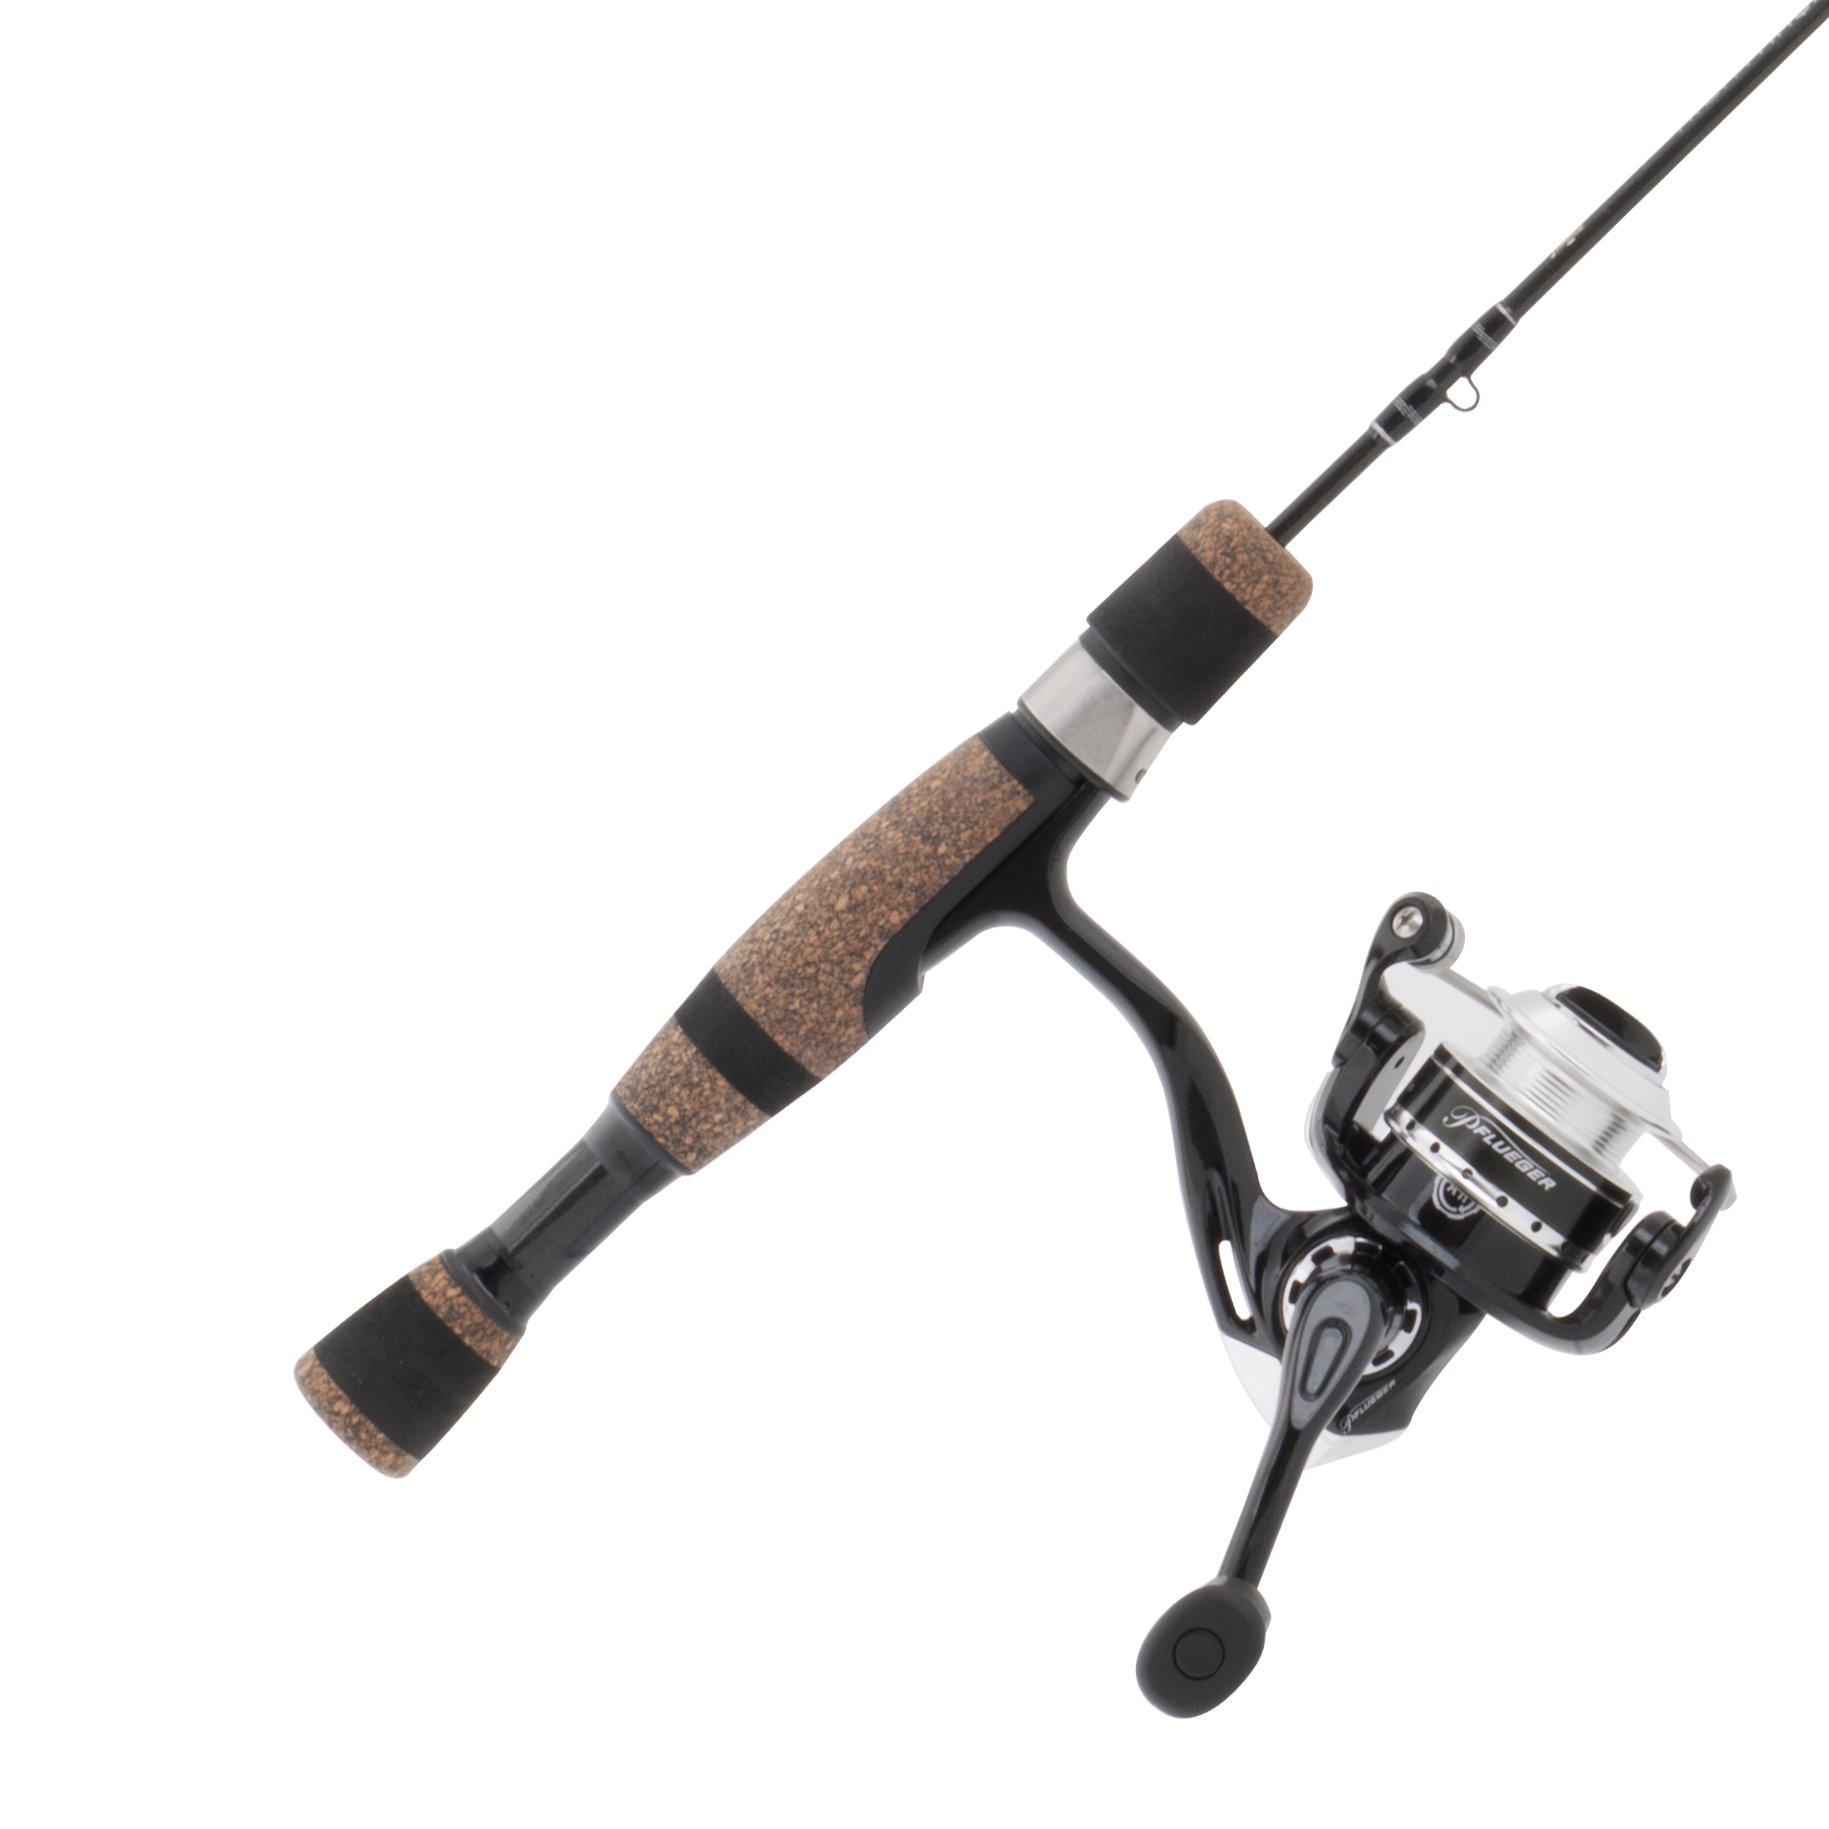 Fenwick NightHawk Ice Rod & Reel Combo , Up to $2.00 Off with Free